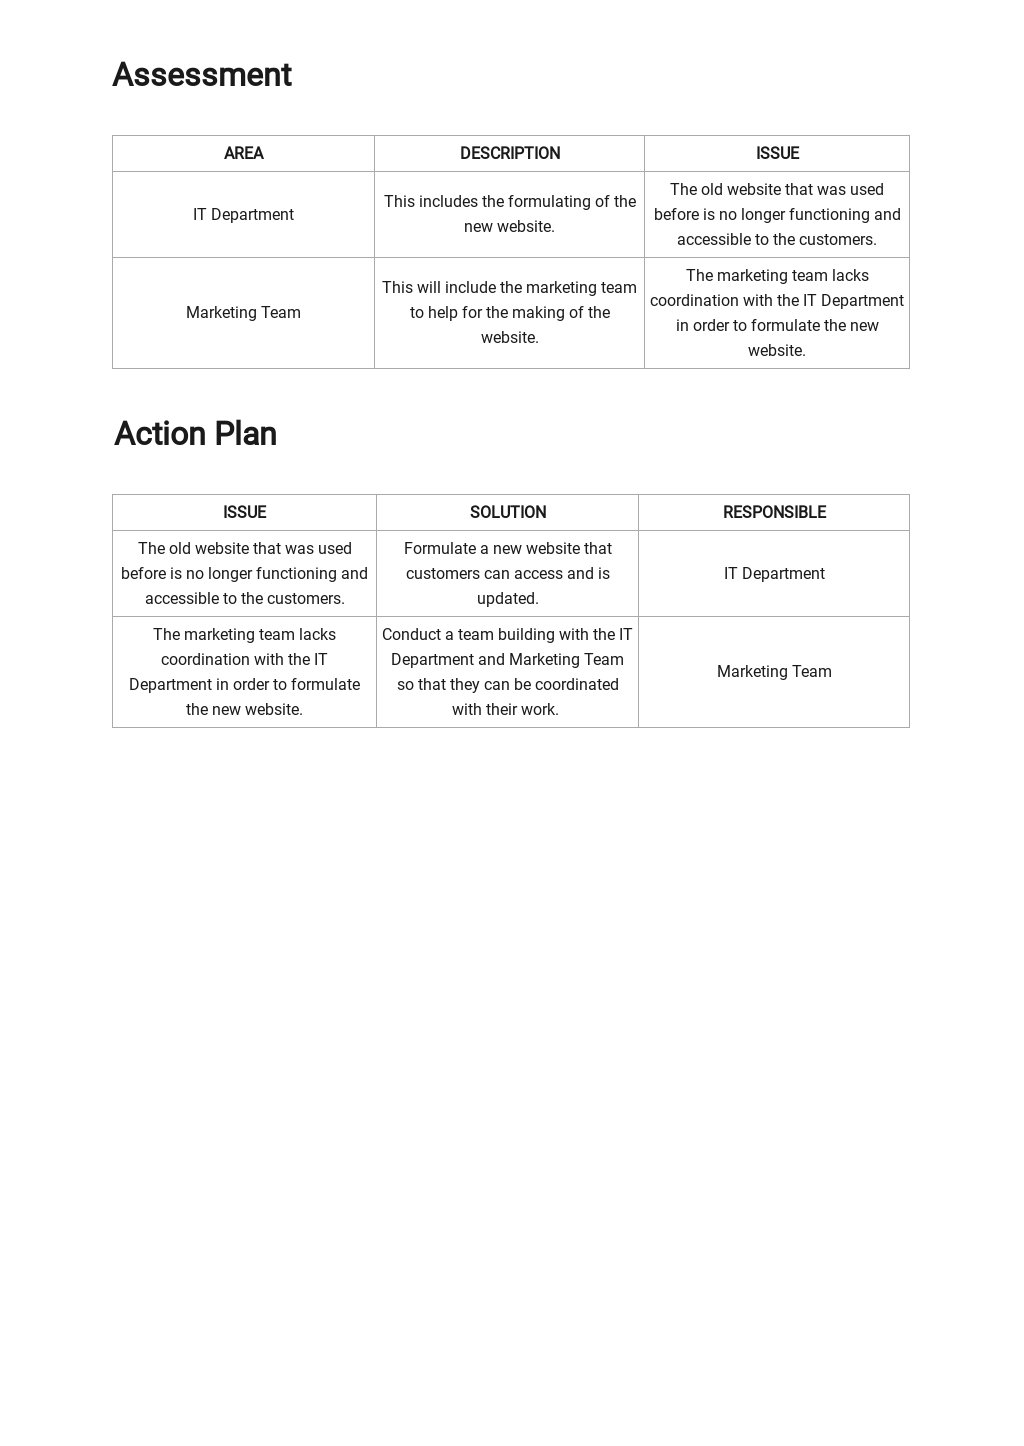 Recommendation Report Template 2.jpe